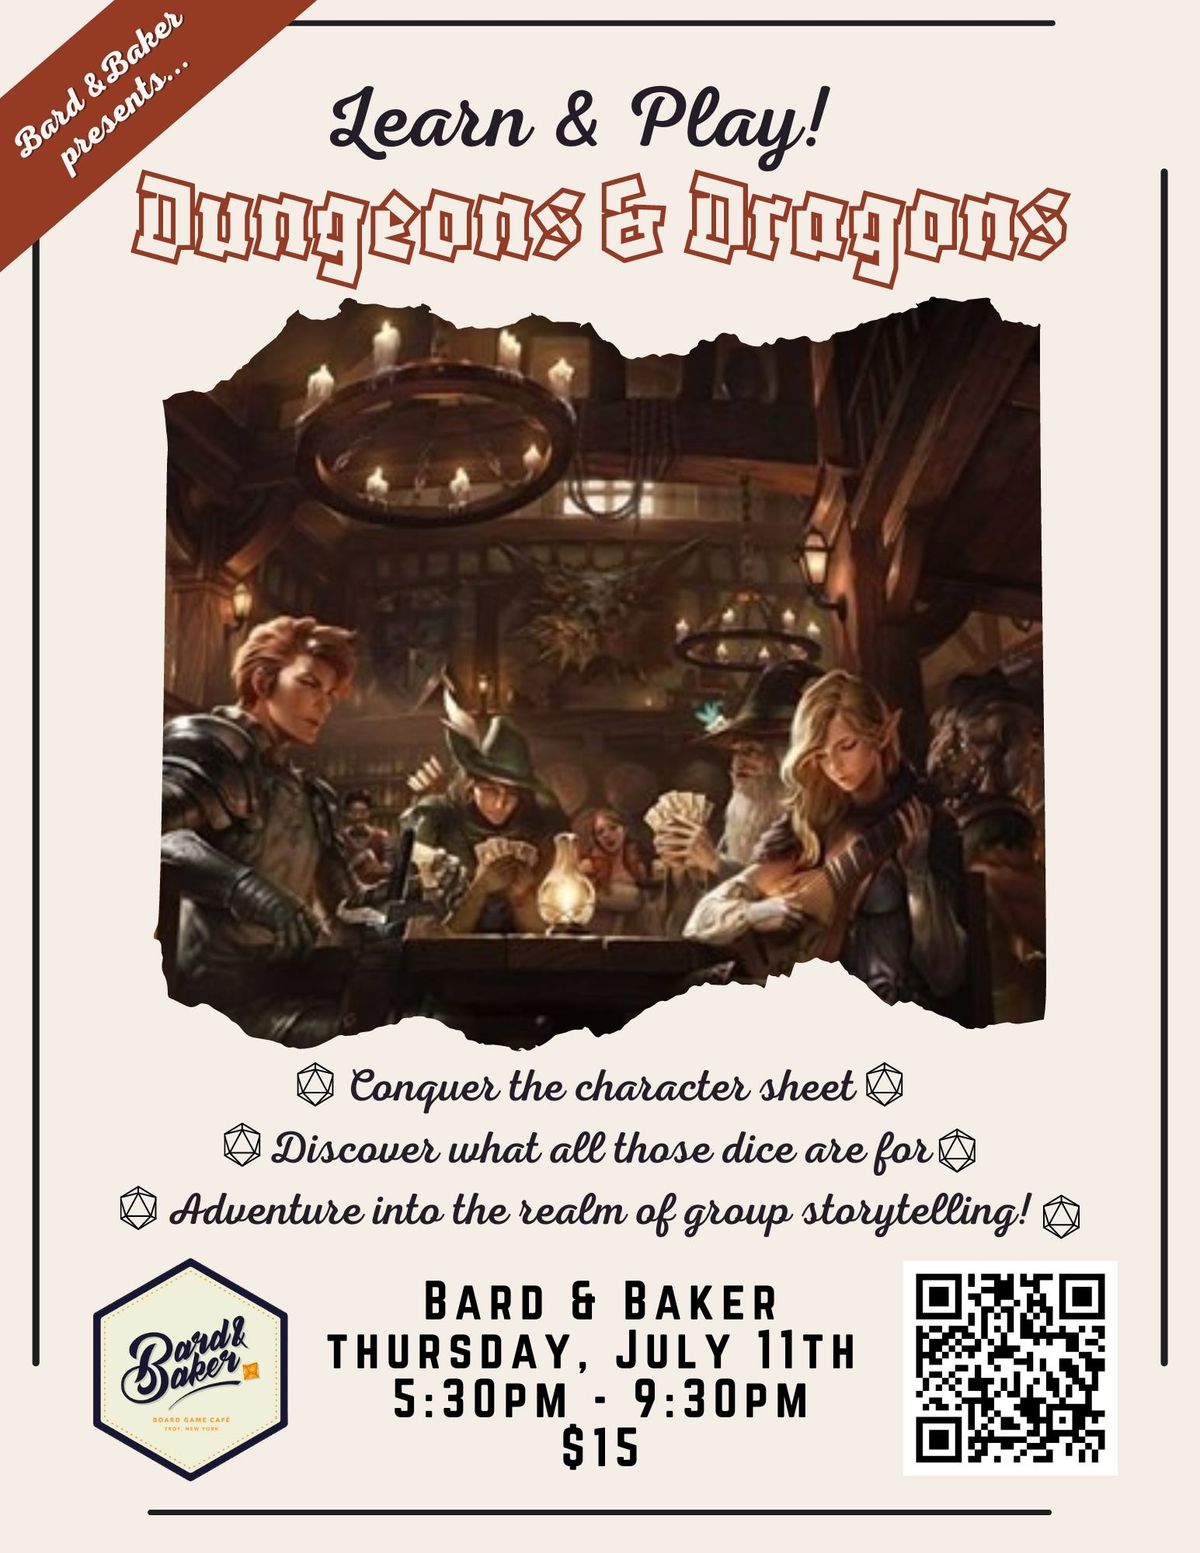 Dungeons & Dragons 101: Learn & Play!